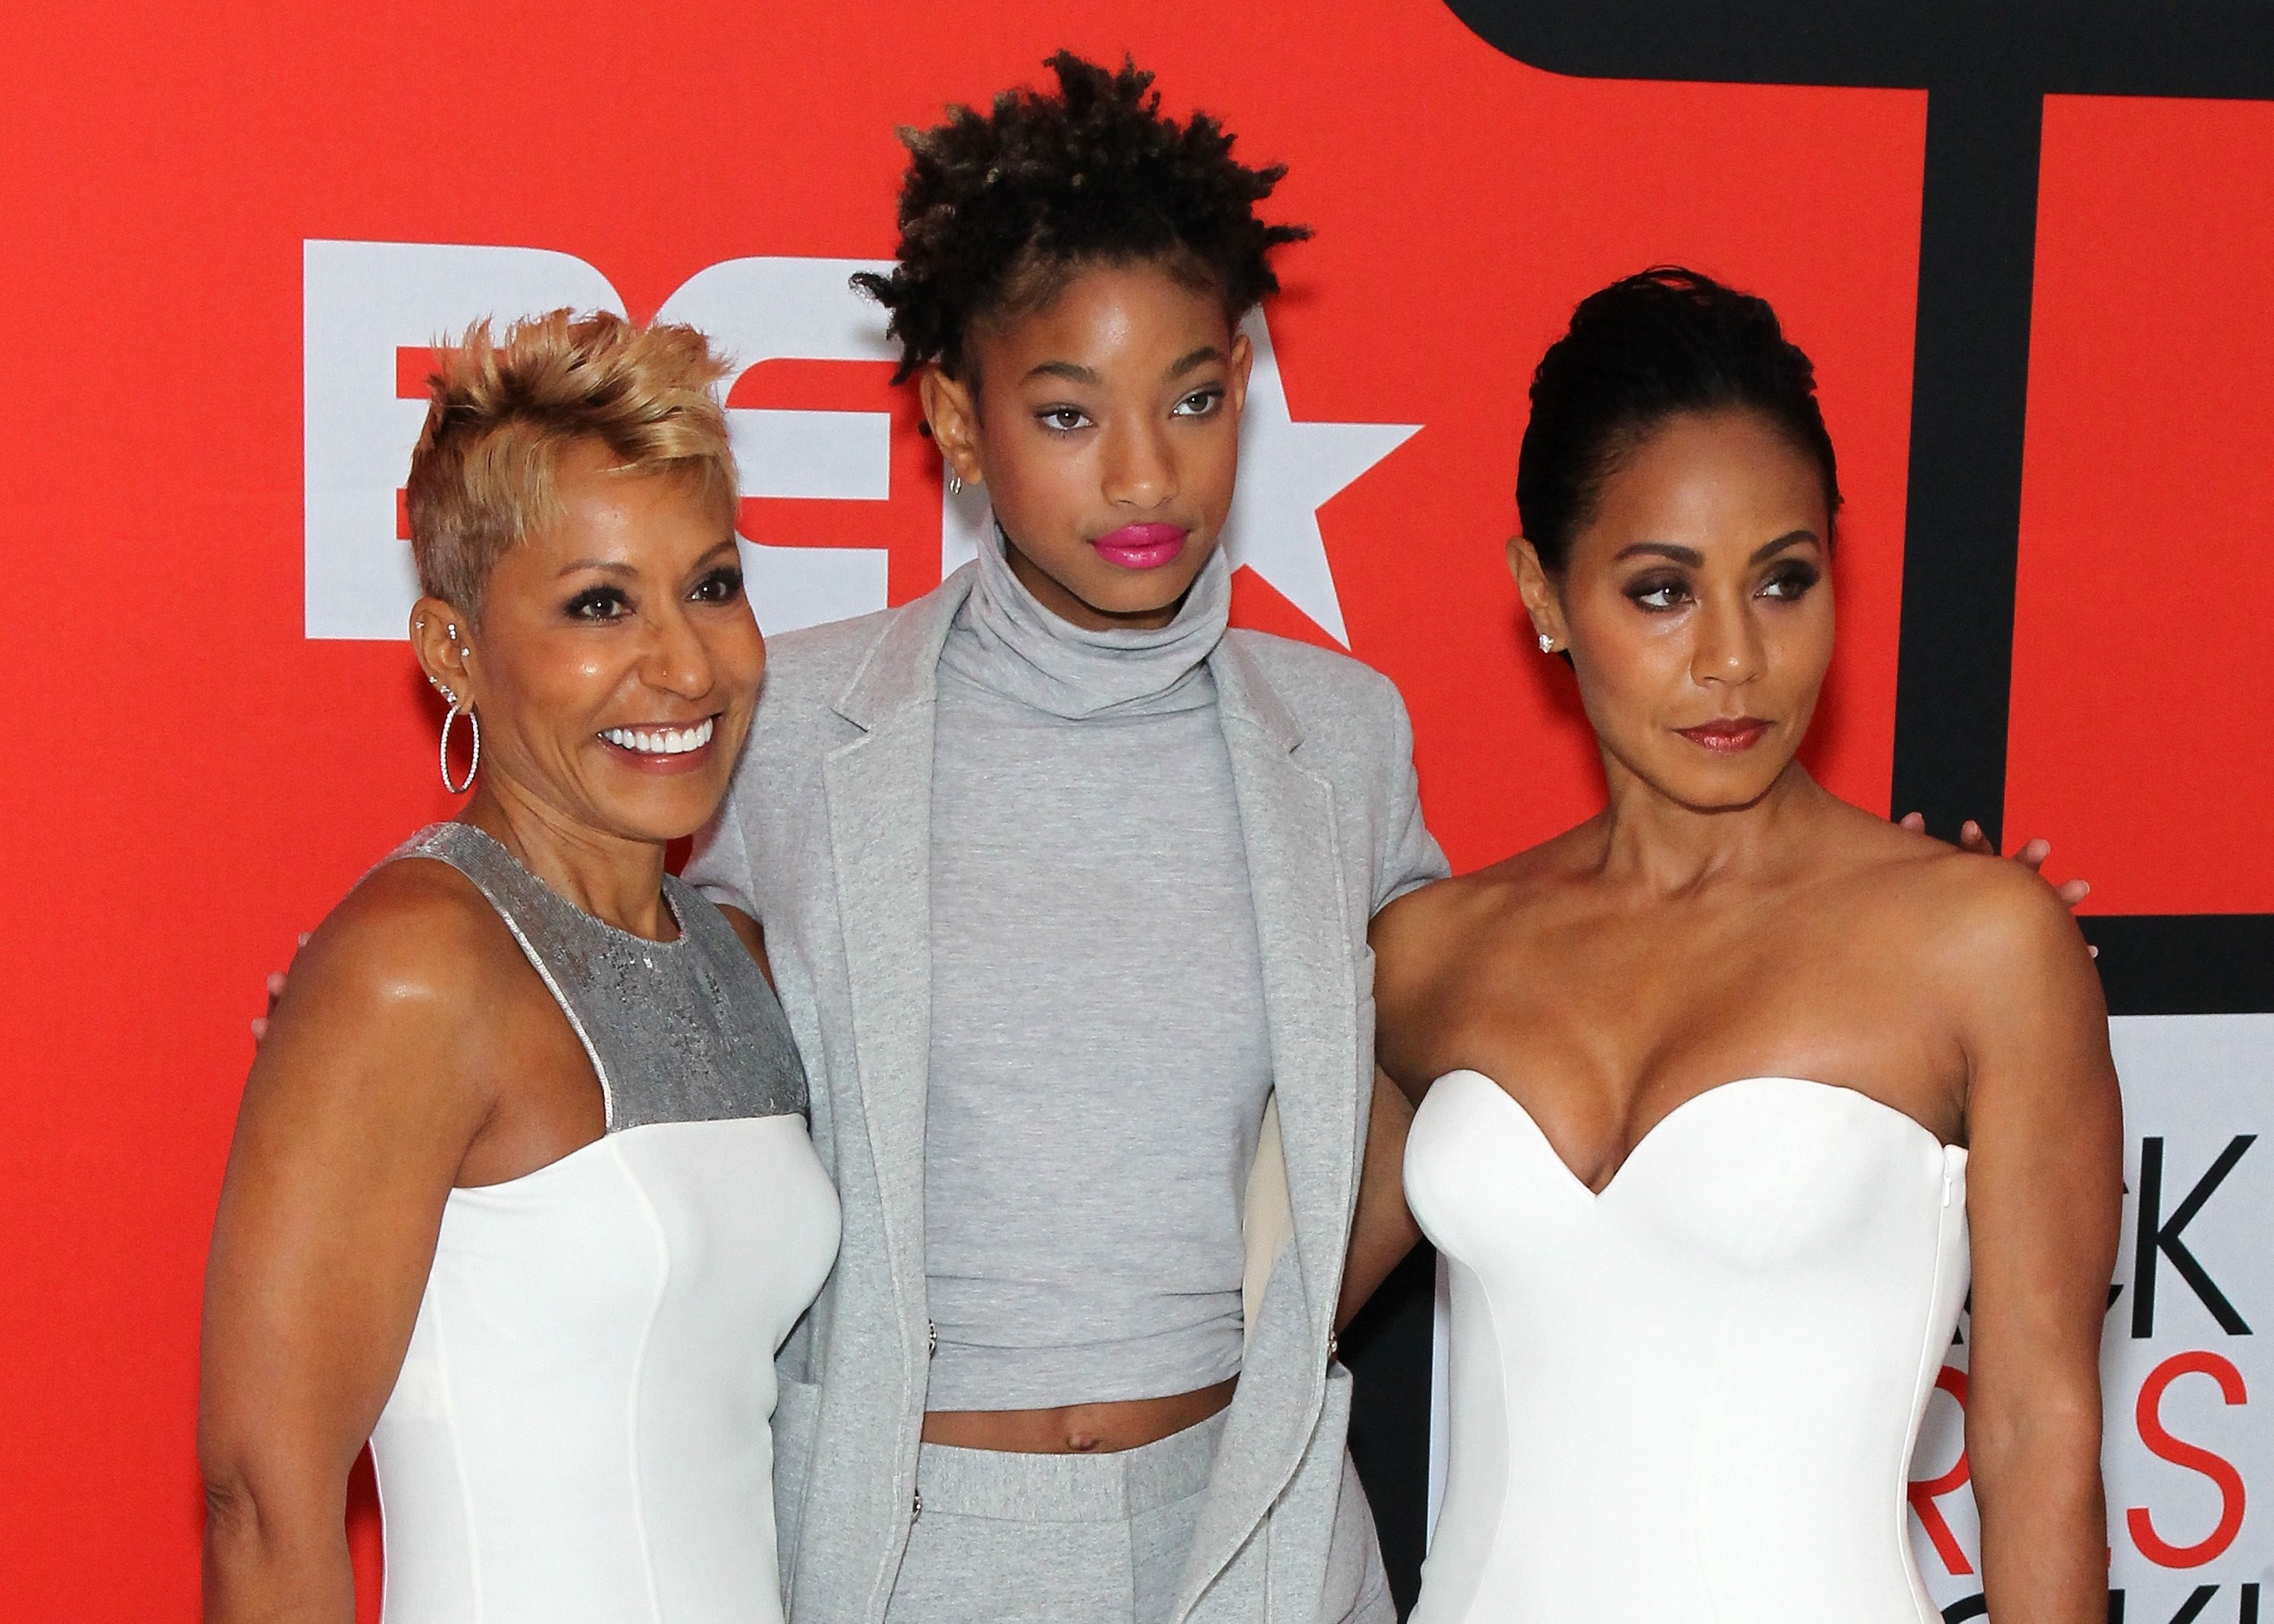 Jada Pinkett Smith and her mom, Adrienne Banfield-Norris and Willow Smith